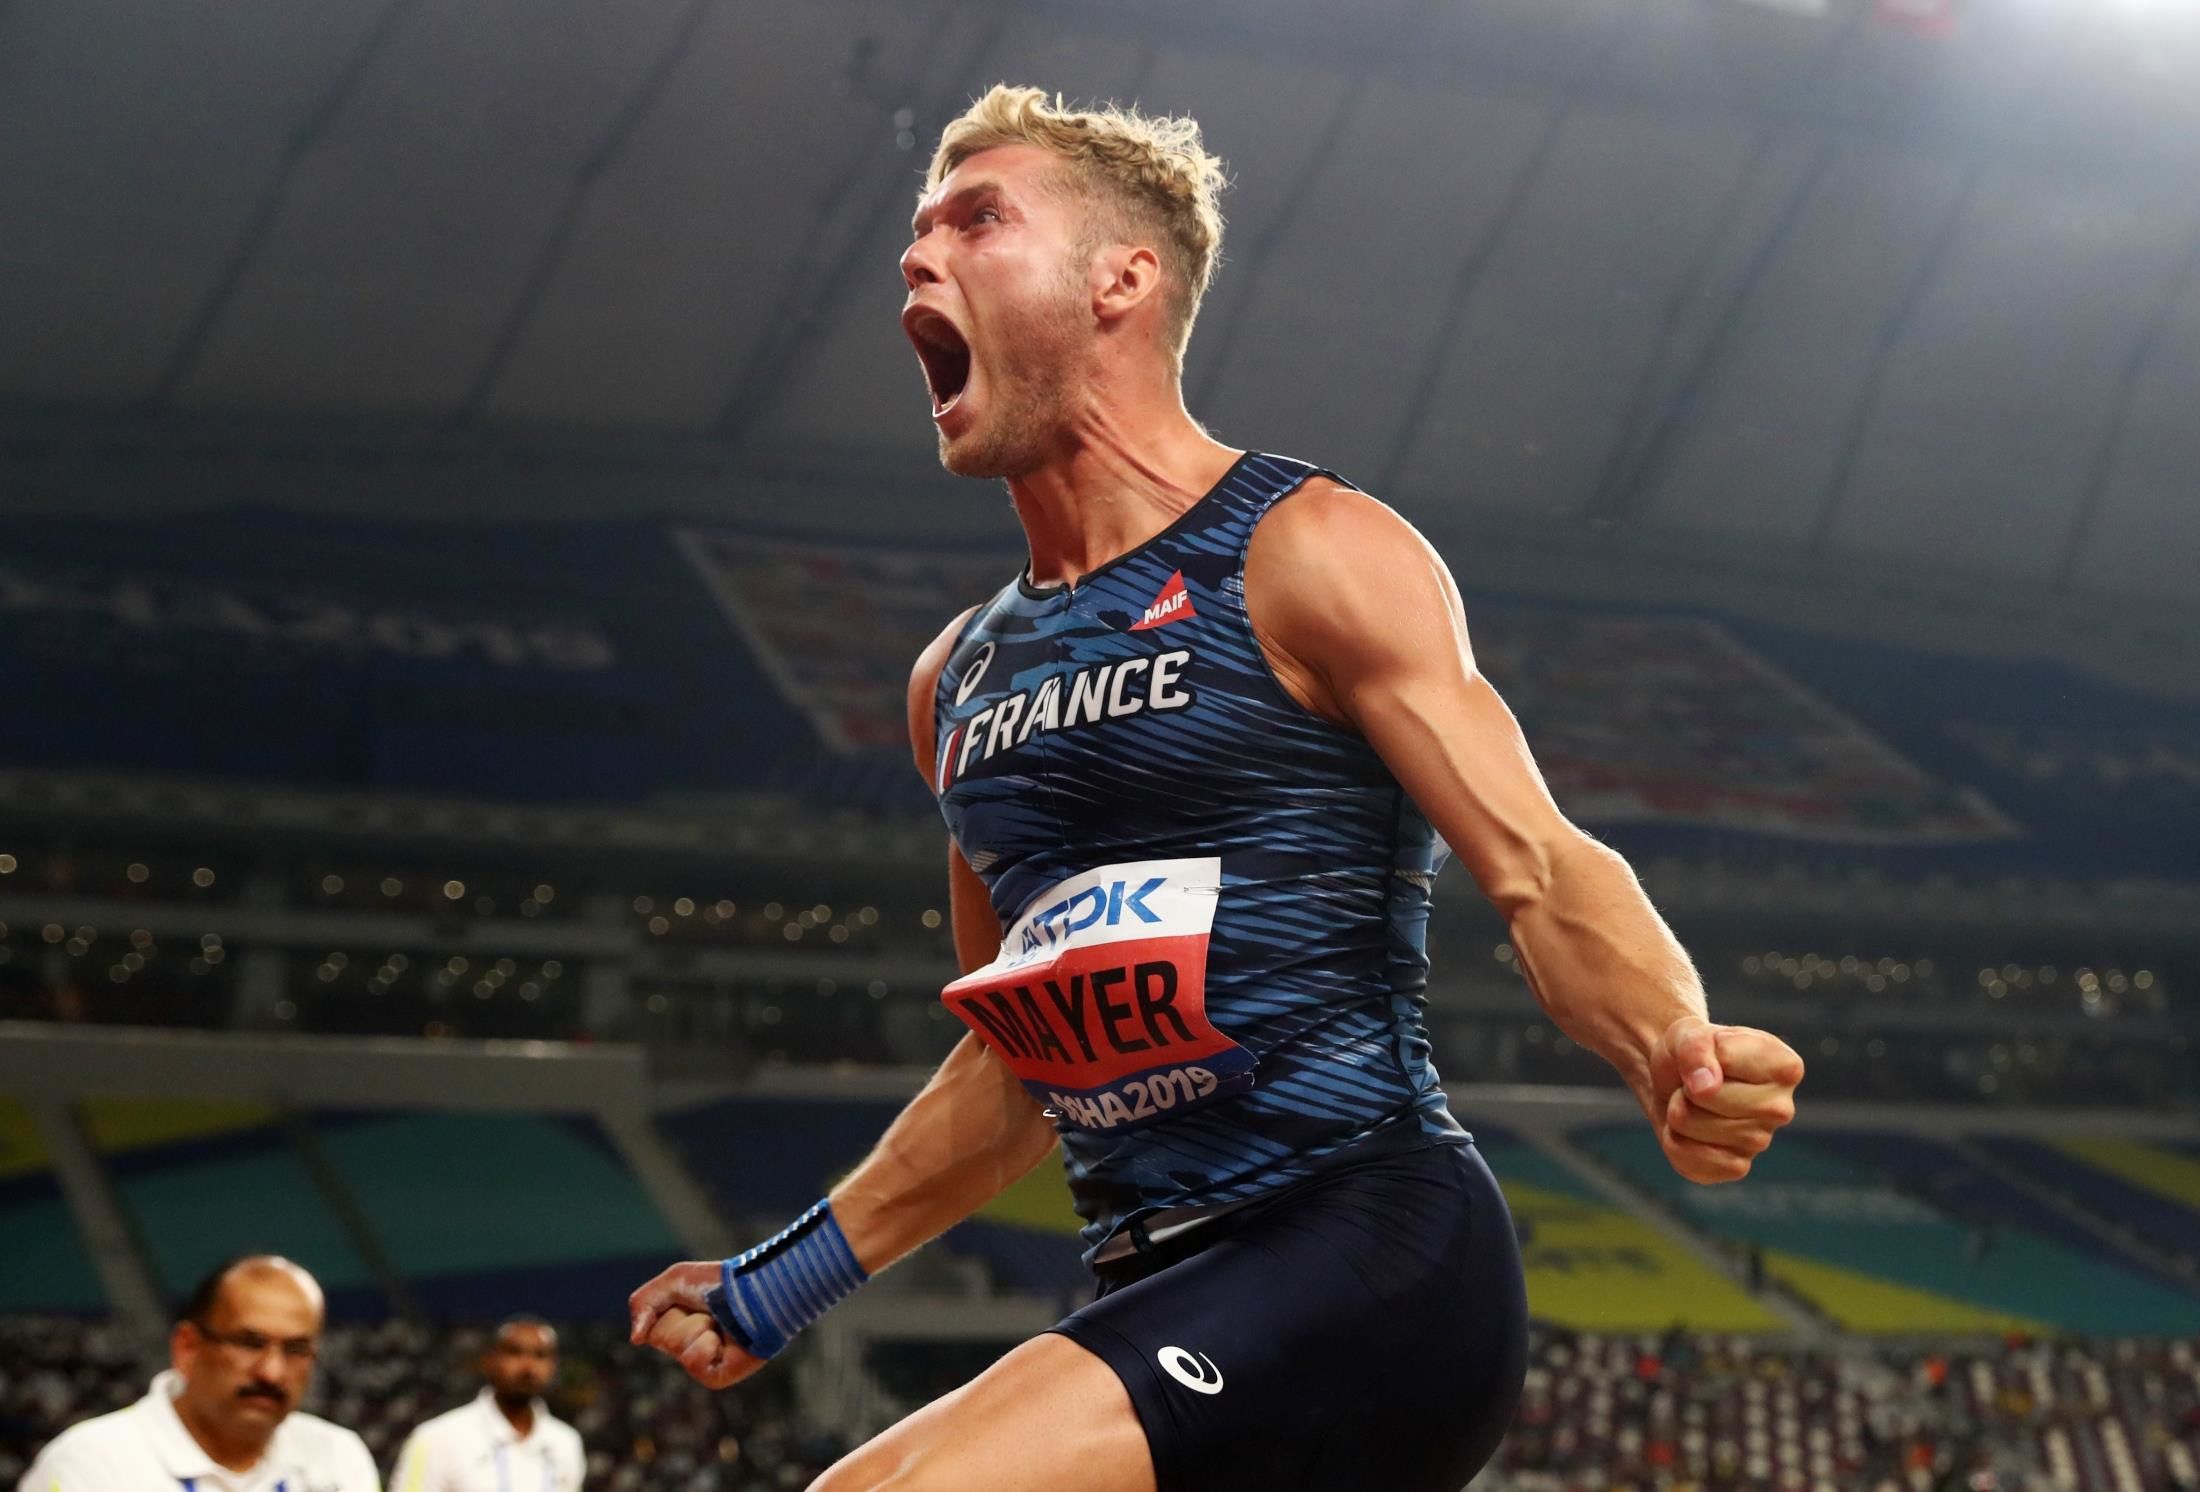 Kevin Mayer after throwing a lifetime decathlon best in the shot put at the IAAF World Championships Doha 2019